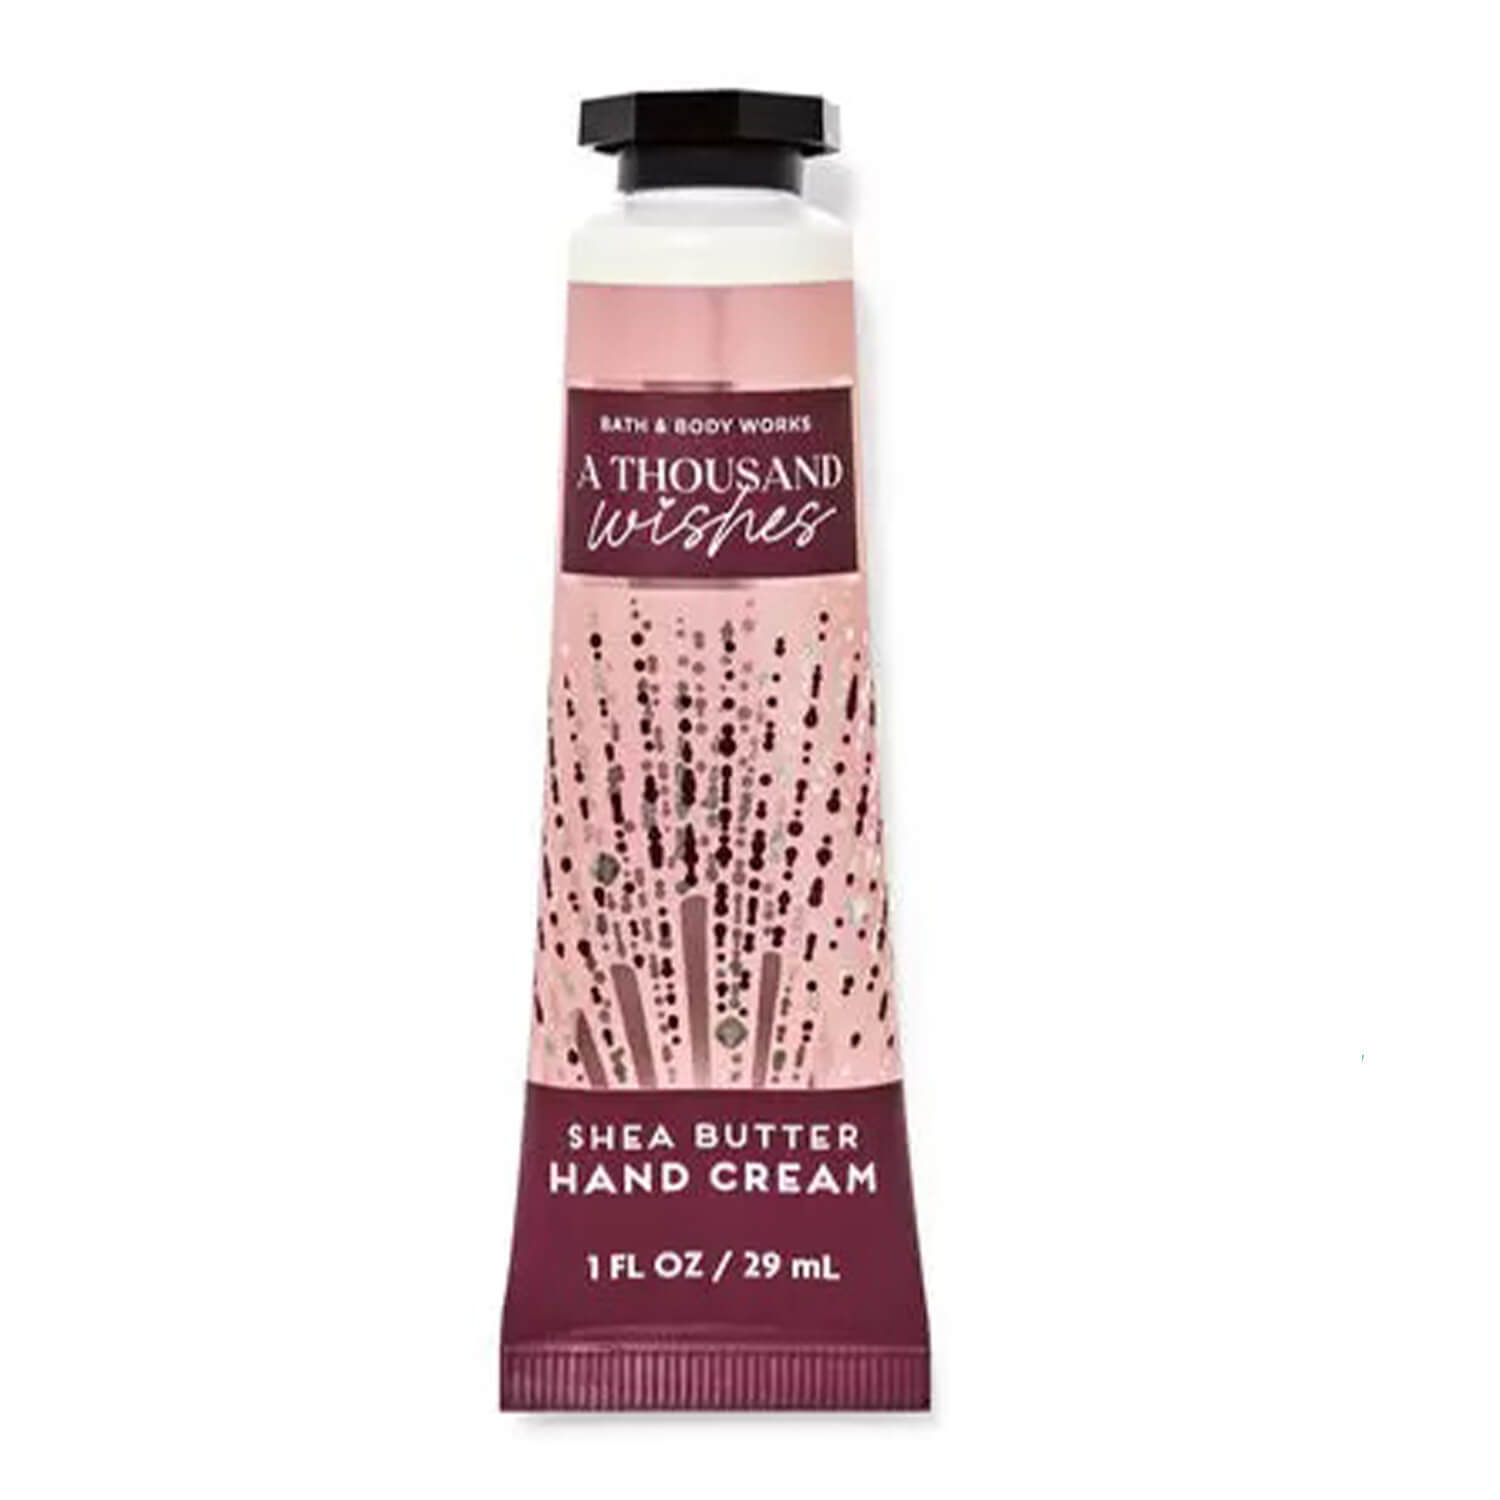 Shop bath and body works hand cream in thousand wishes available at Heygirl.pk for delivery in Pakistan